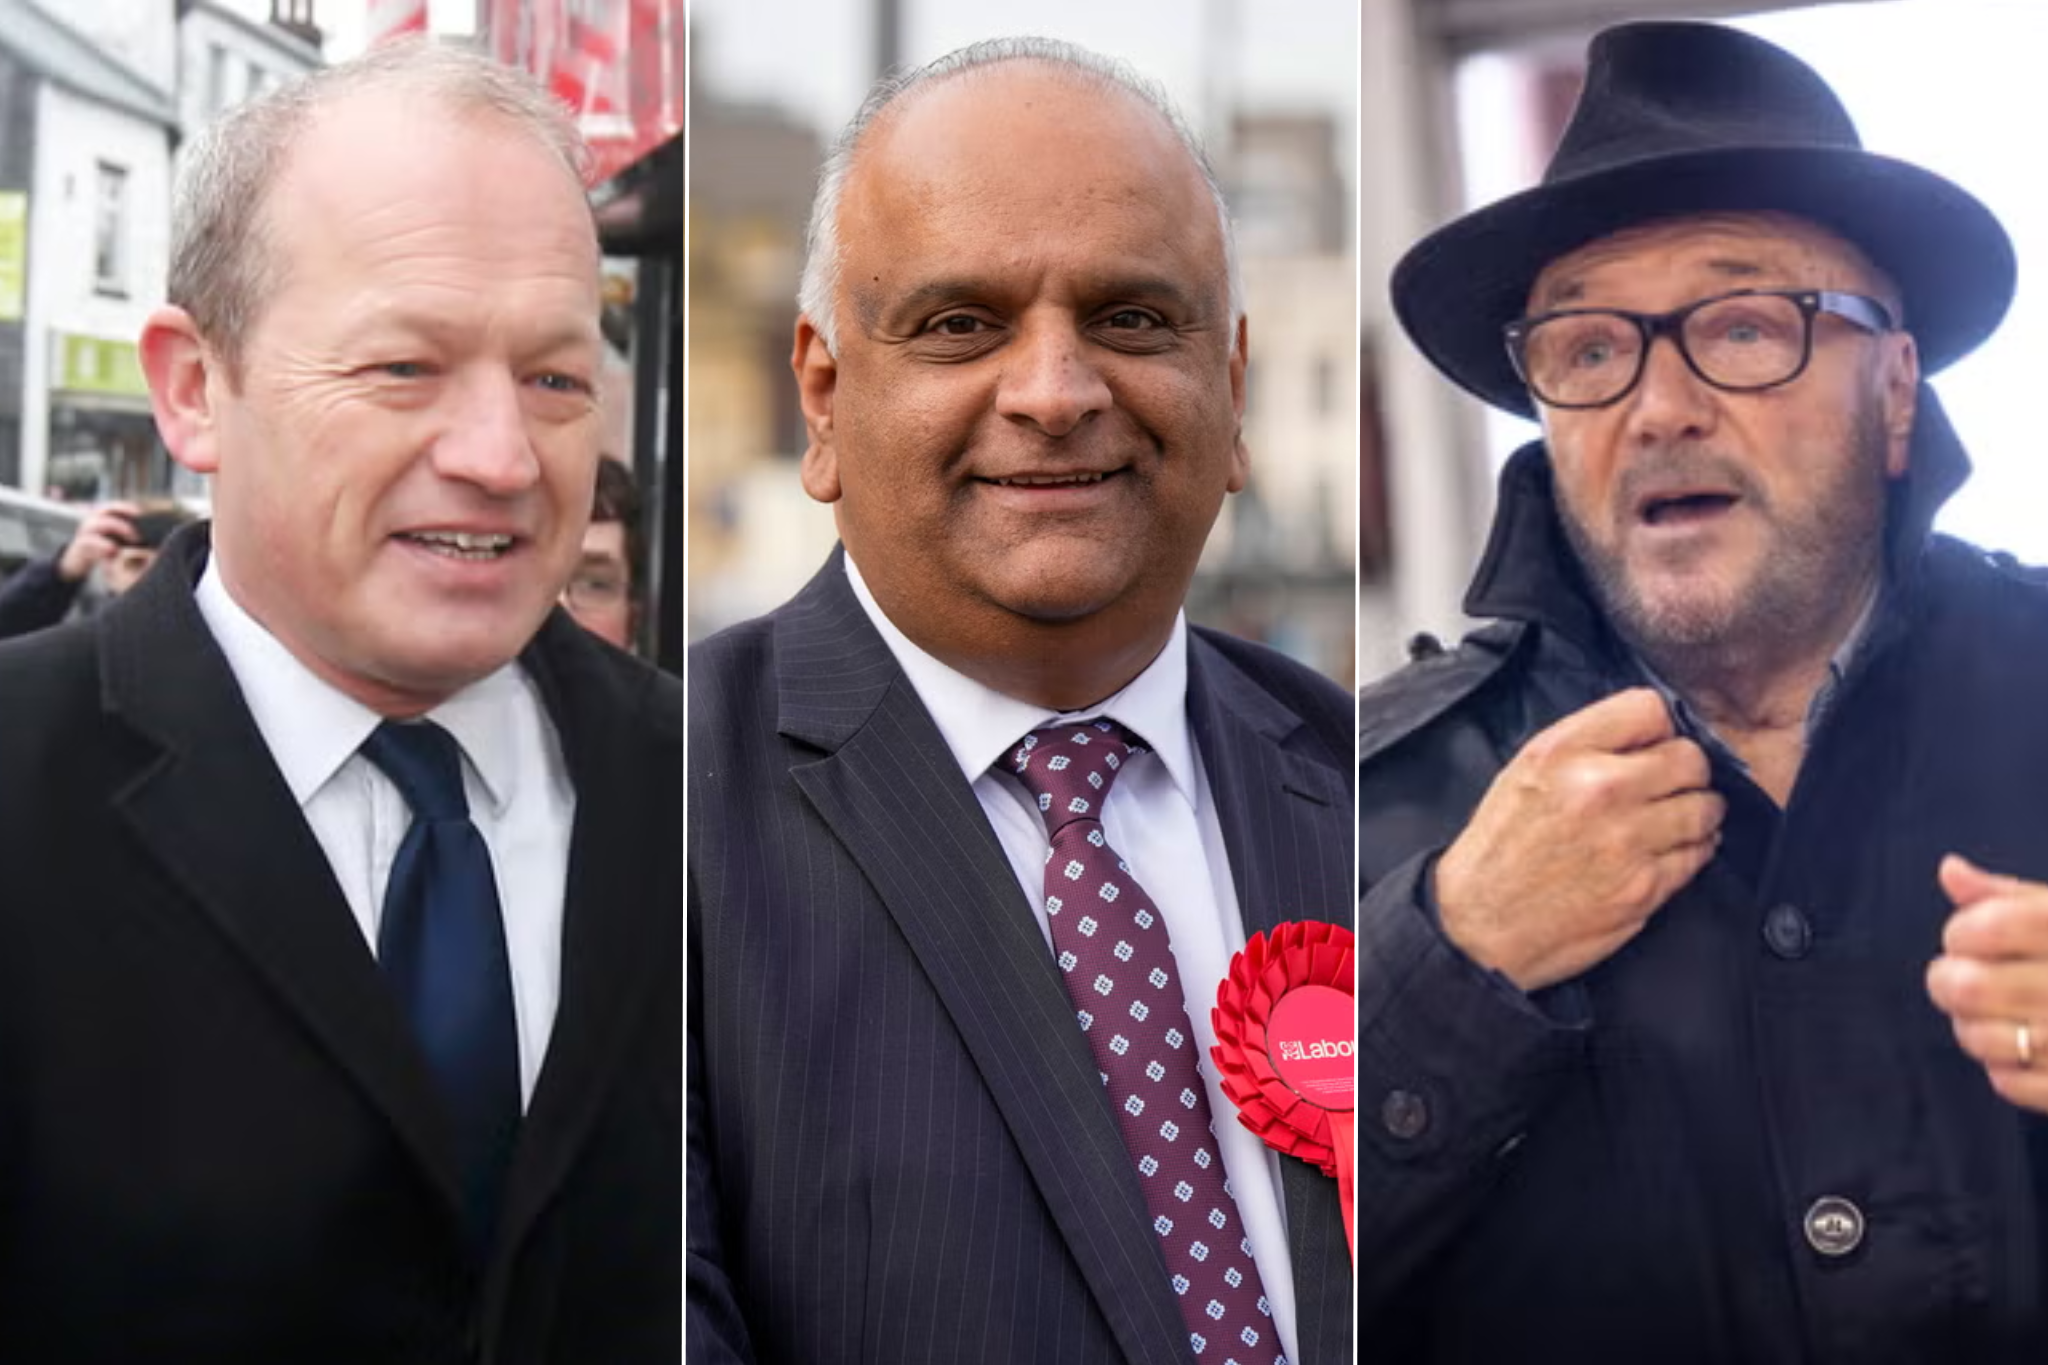 Simon Danczuk (Reform UK), Azhar Ali (former Labour) and George Galloway (Workers Party) were among the candidates in the Rochdale by-election